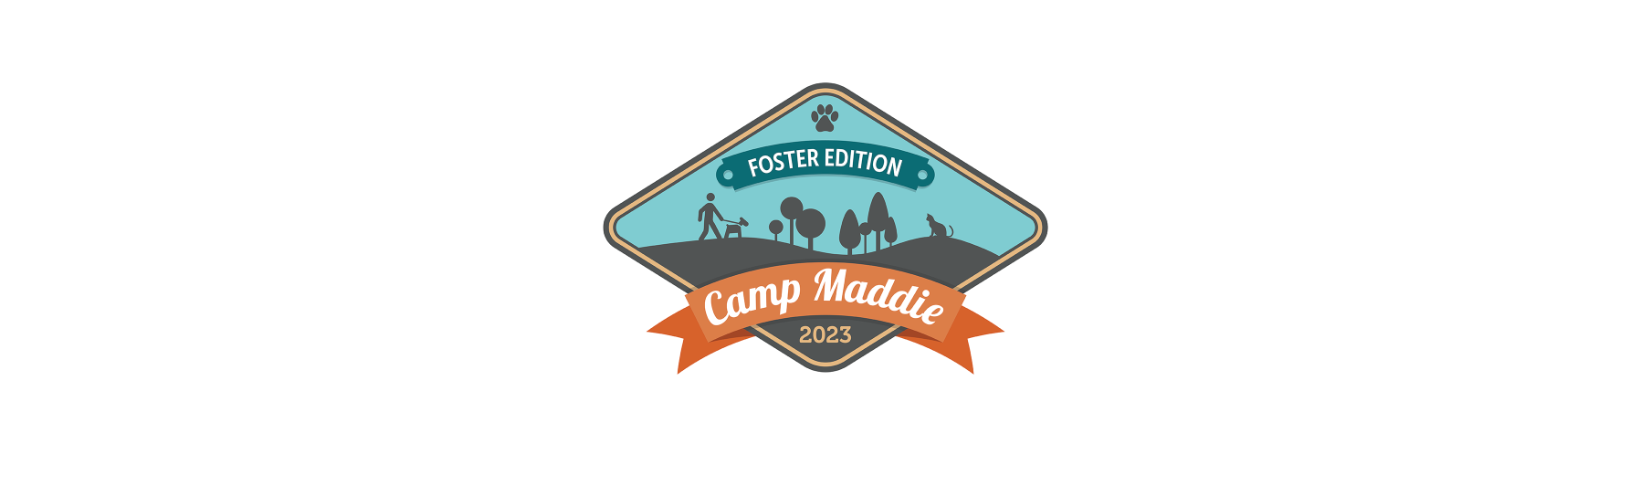 Camp Maddie: Foster Edition - Learn from the Pros: Dog Foster Recruitment Strategies that are Working Right Now